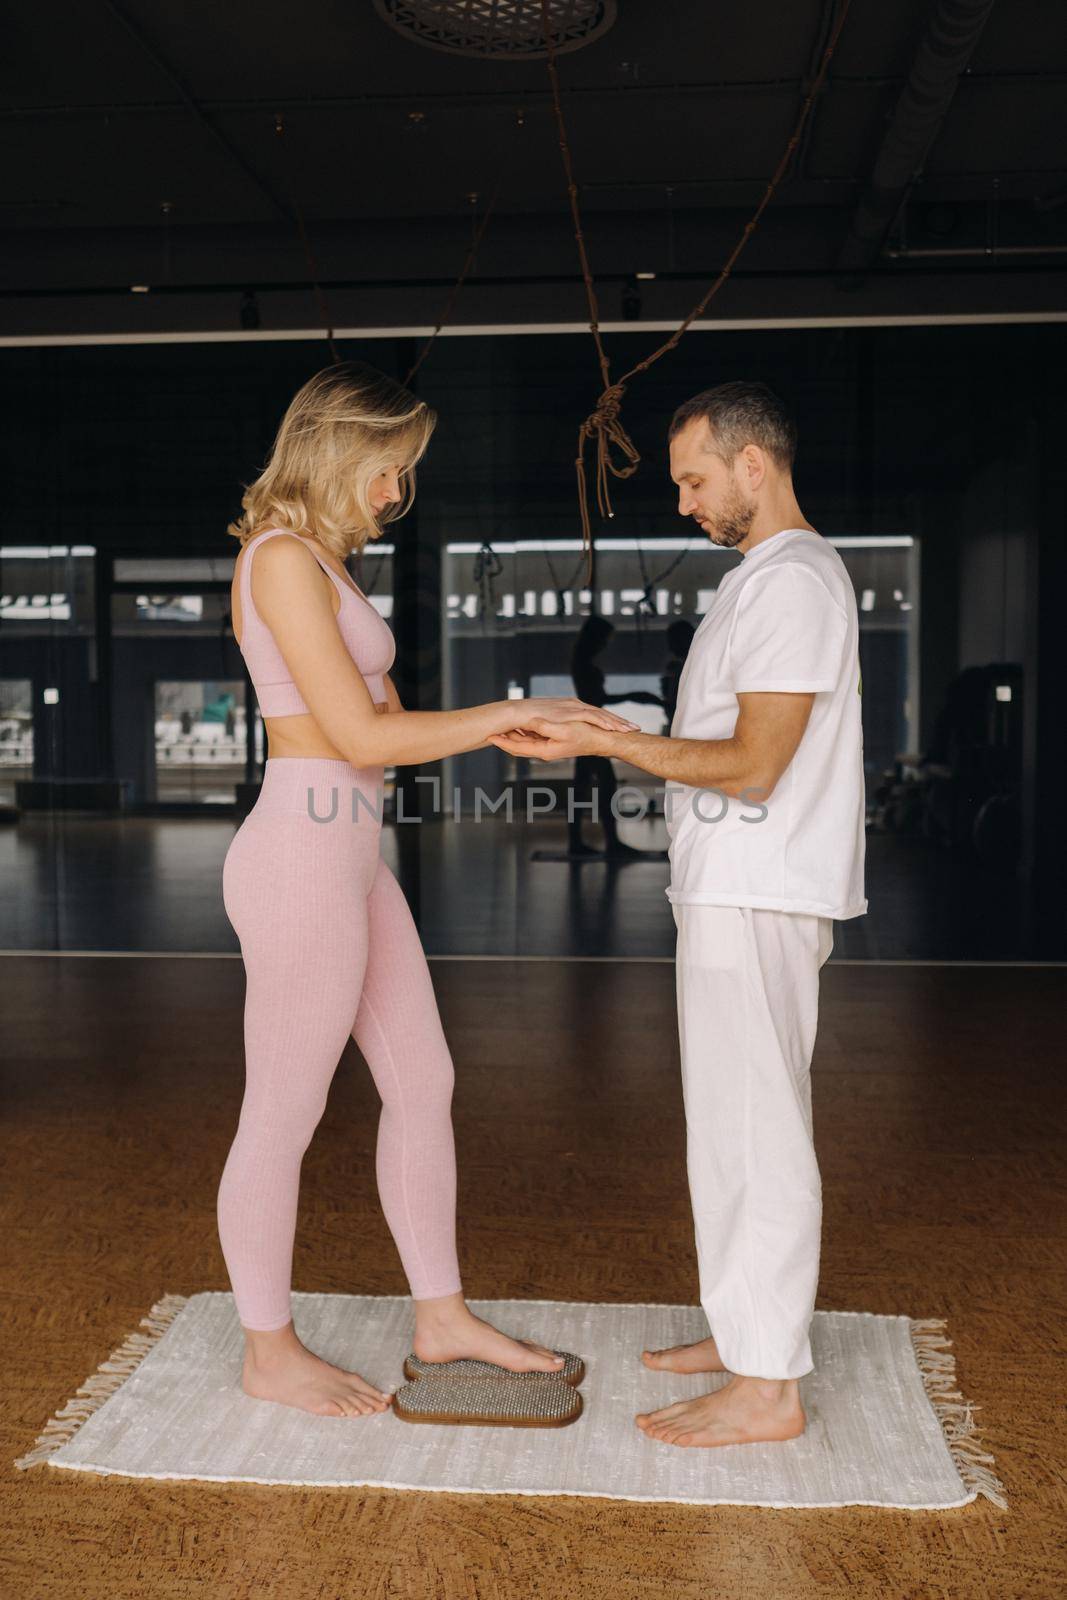 a man and a woman do yoga on boards with nails in the gym.